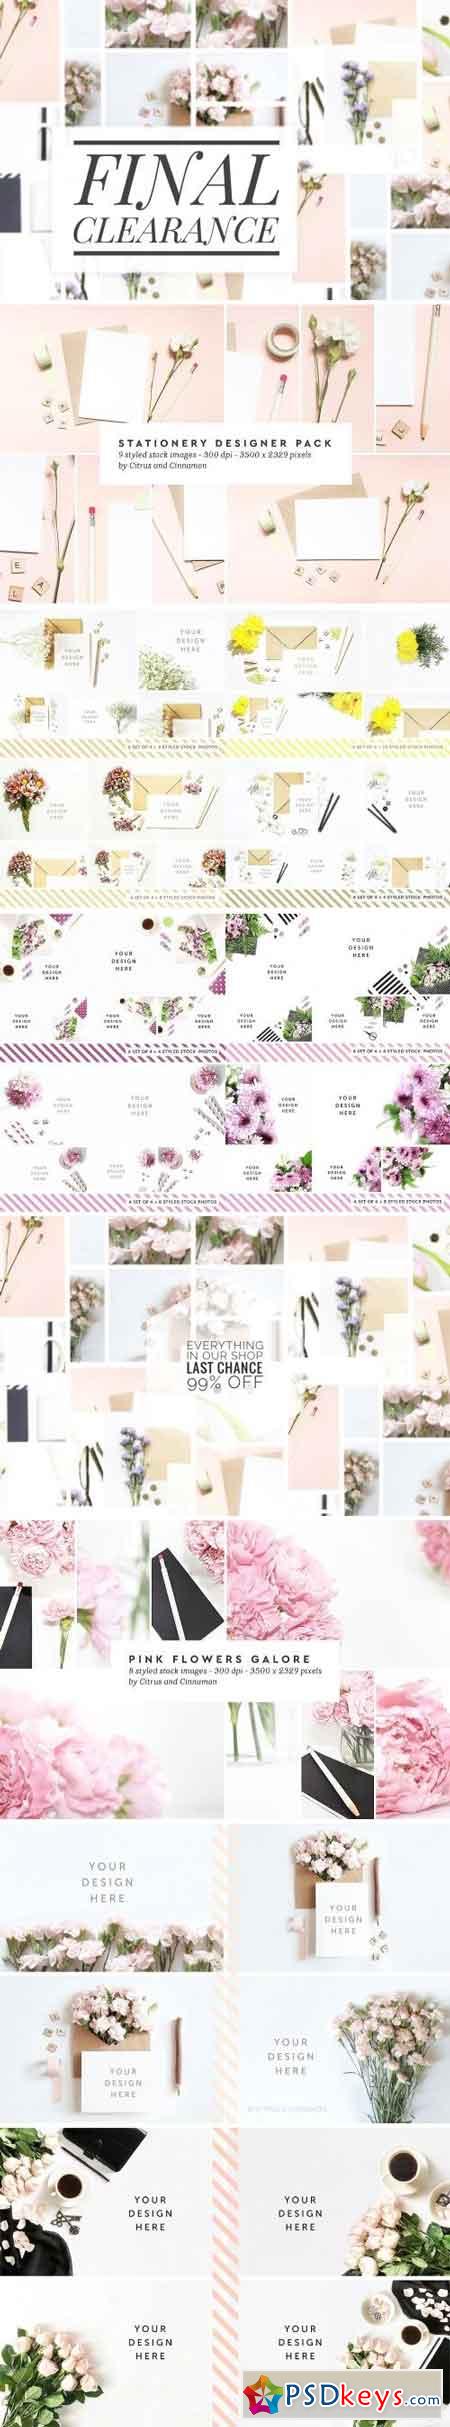 Styled Stock Photograpy - Cards and Invitation Mock Up Final Clearance 2029476